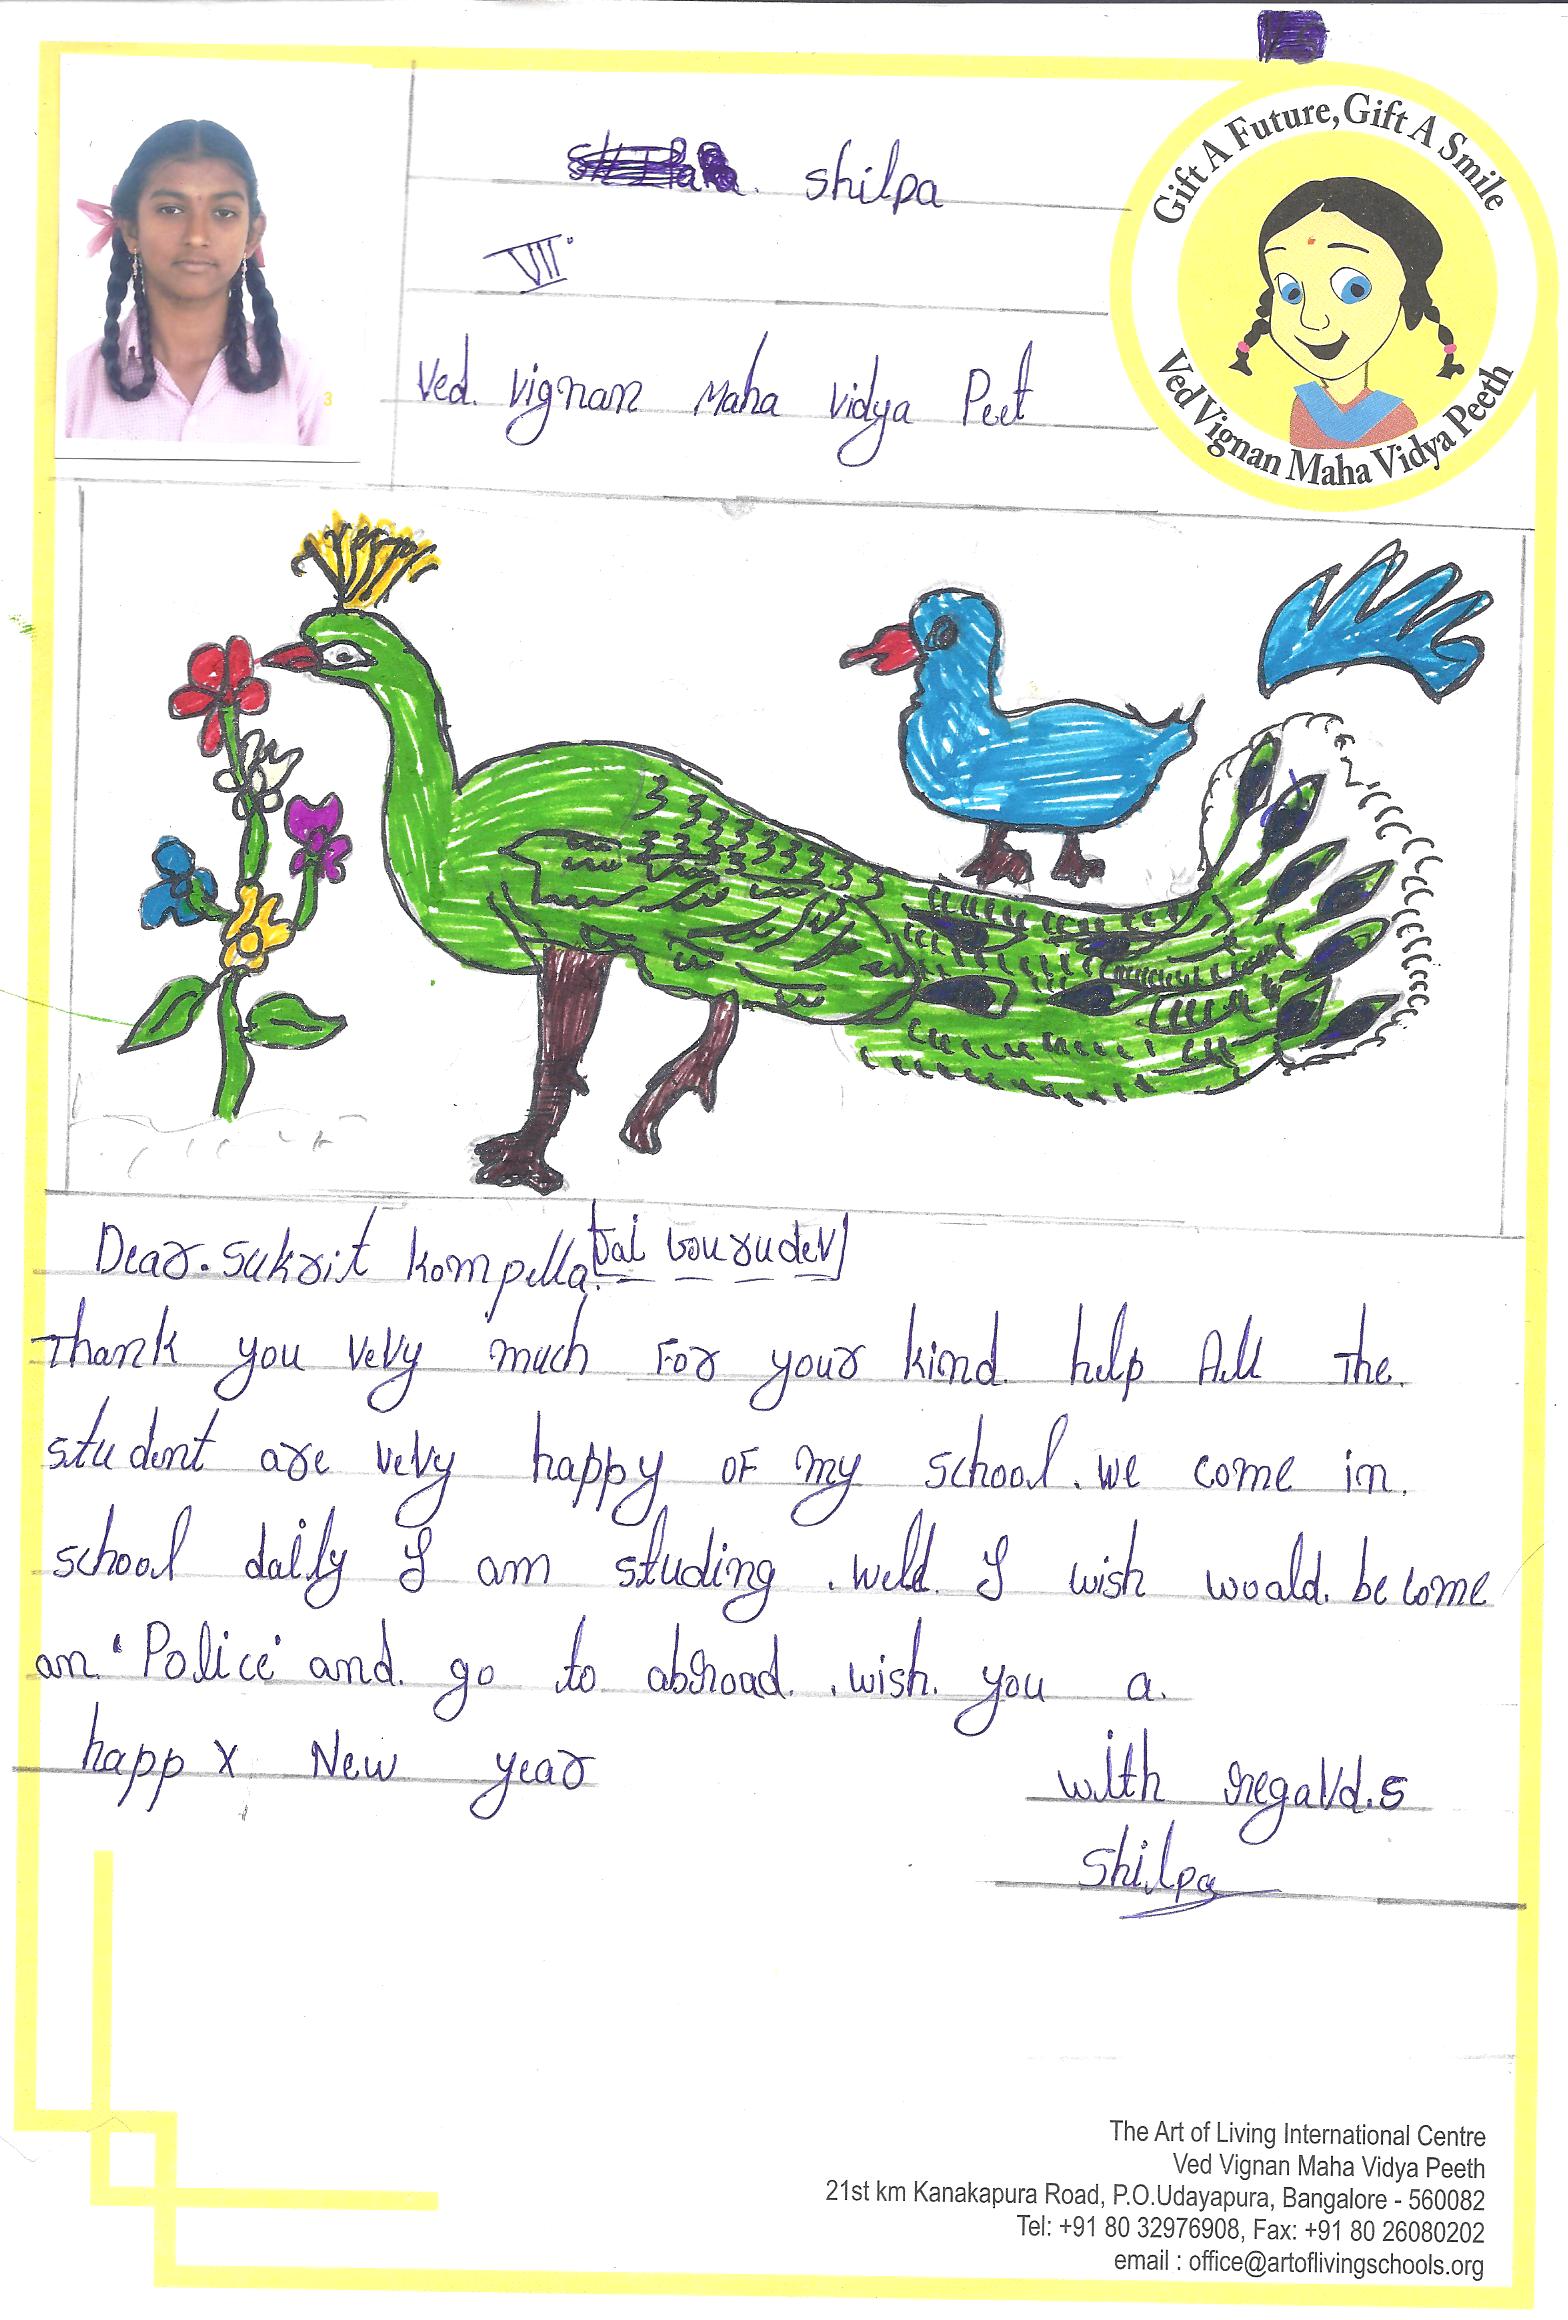 Peacock painting by rural school child Shilpa